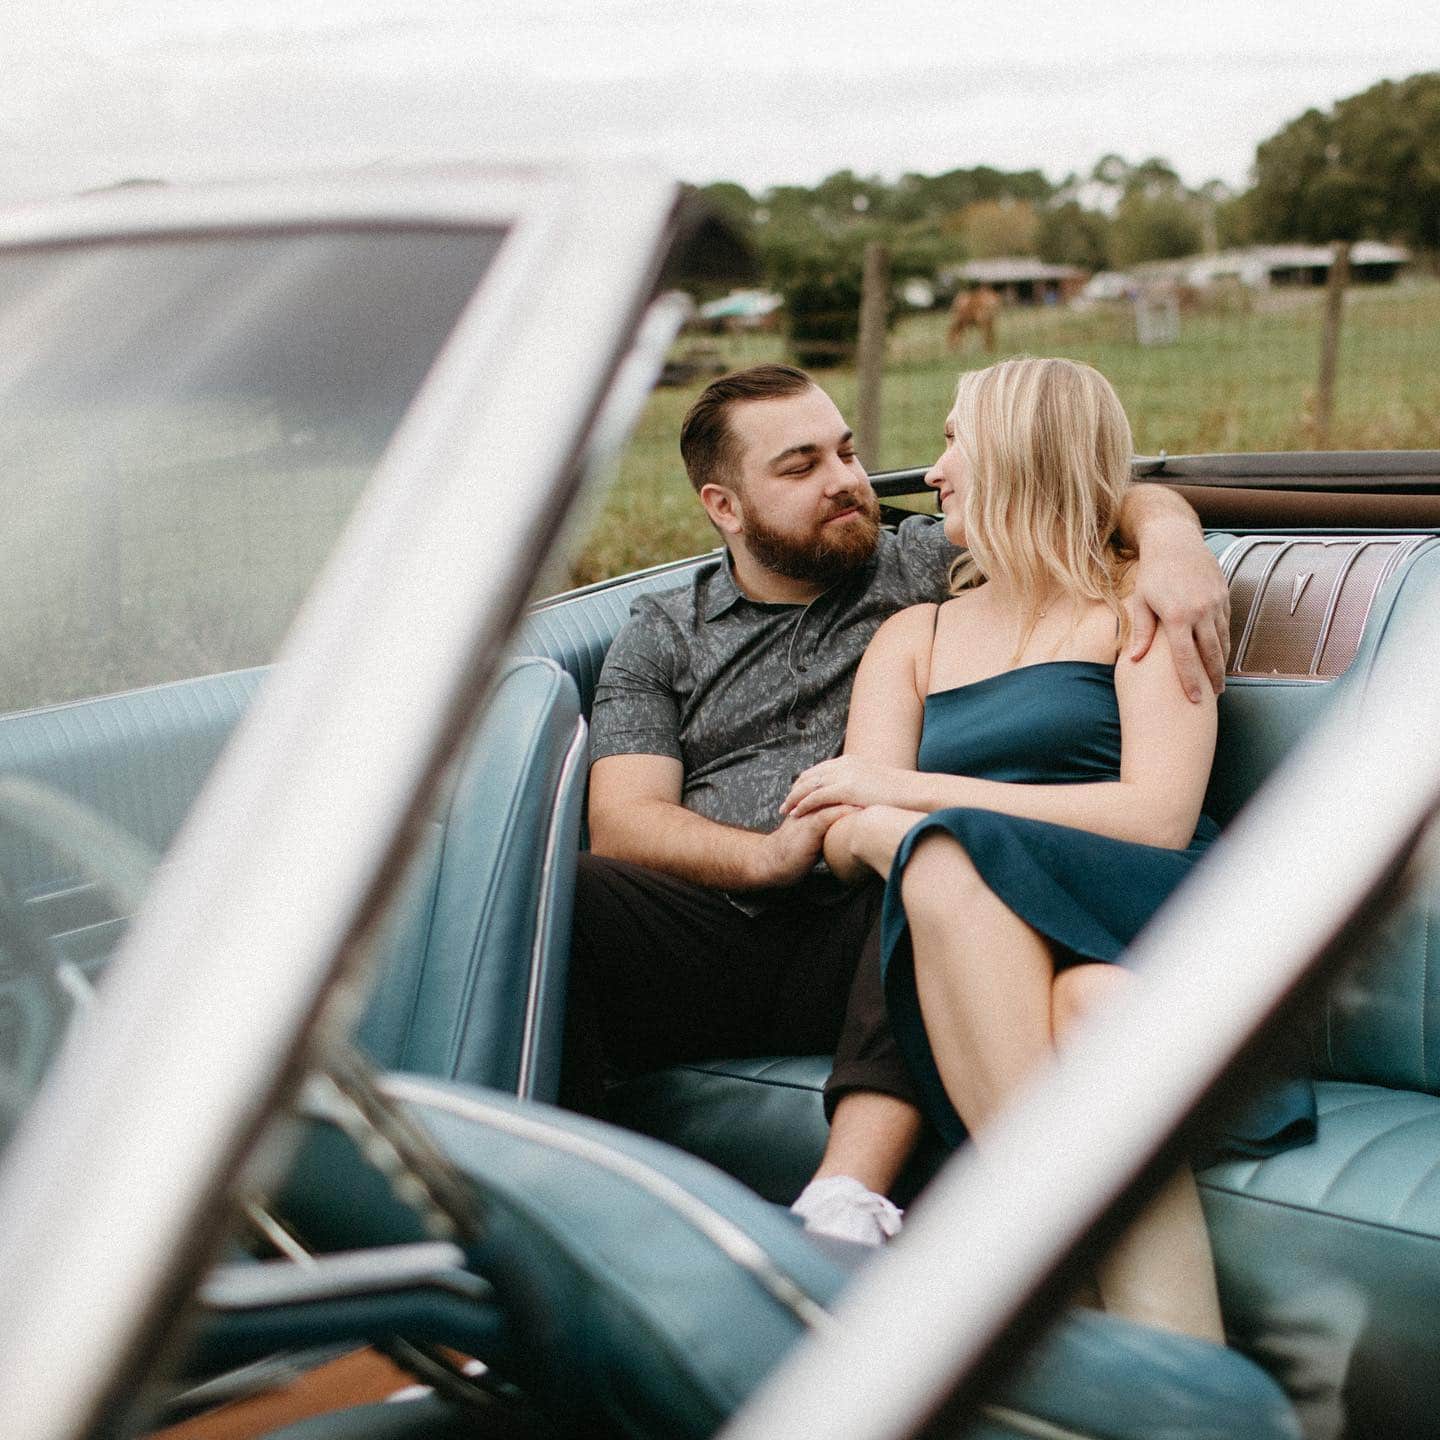 blonde girl wearing emerald dress sits next to man with beard in the backseat of classic car